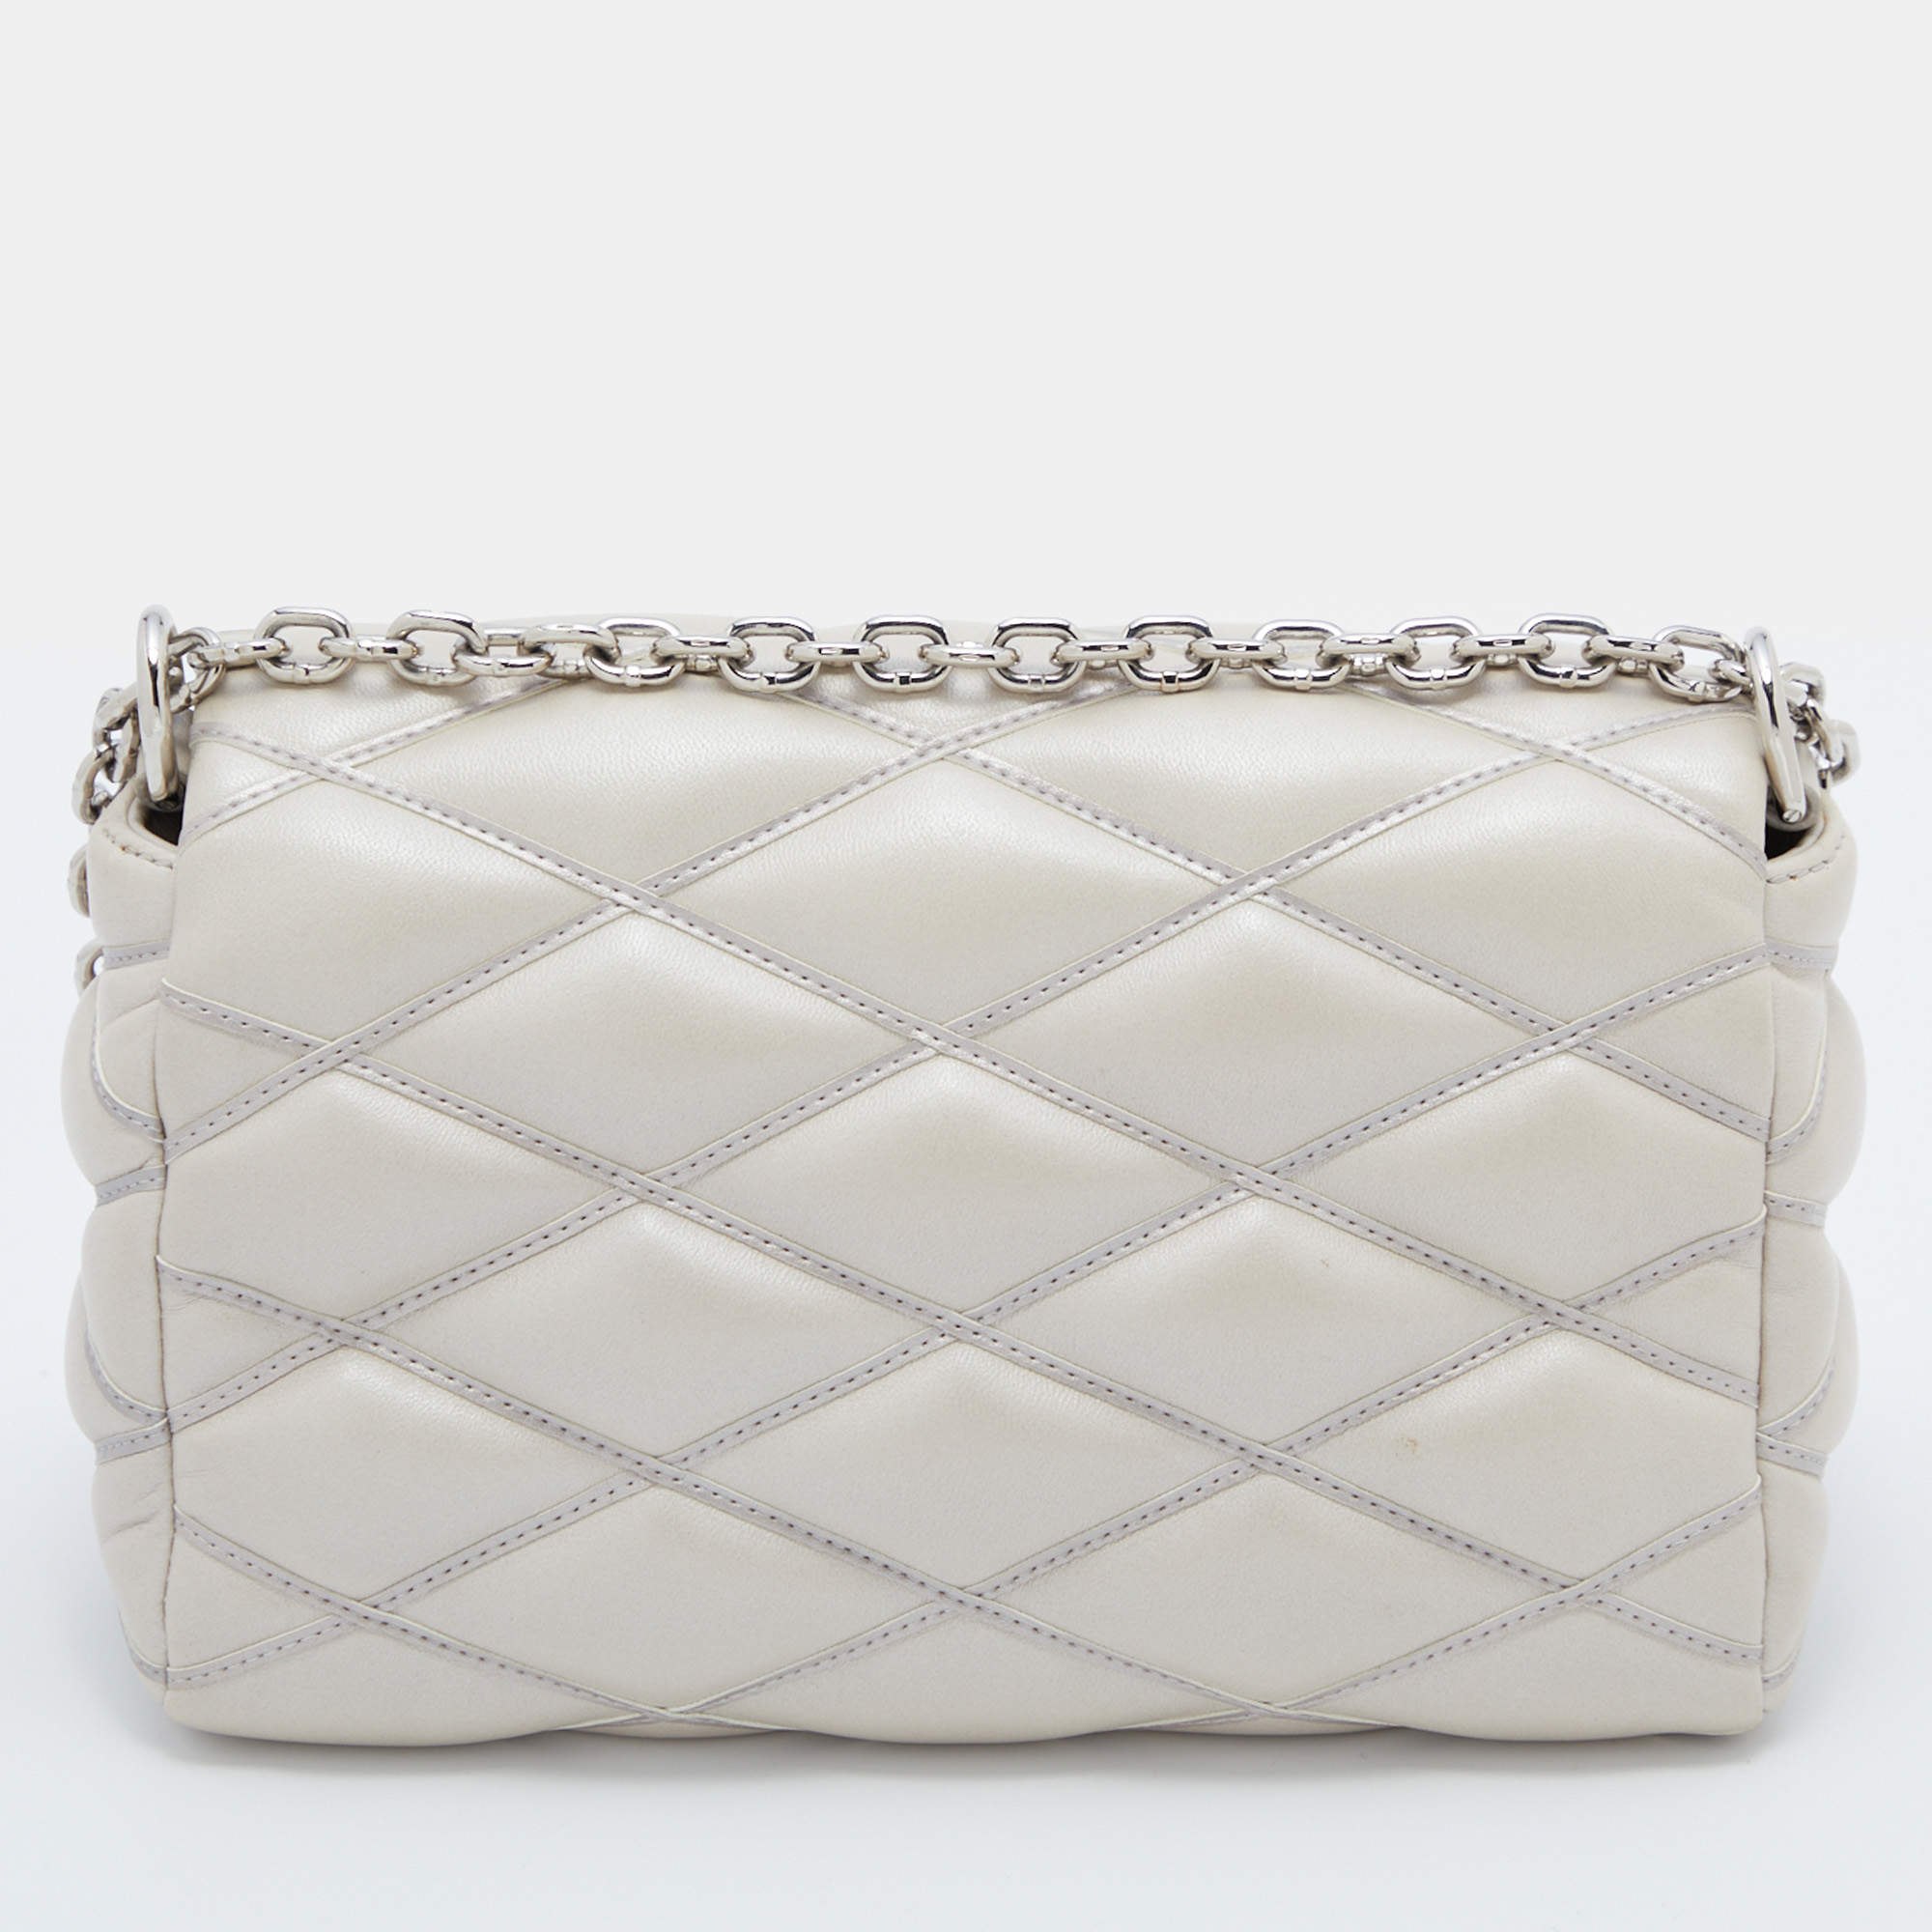 louis vuitton lambskin go-14 malletage (tr2195) mm beige color silver  hardware, with mirror & dust cover